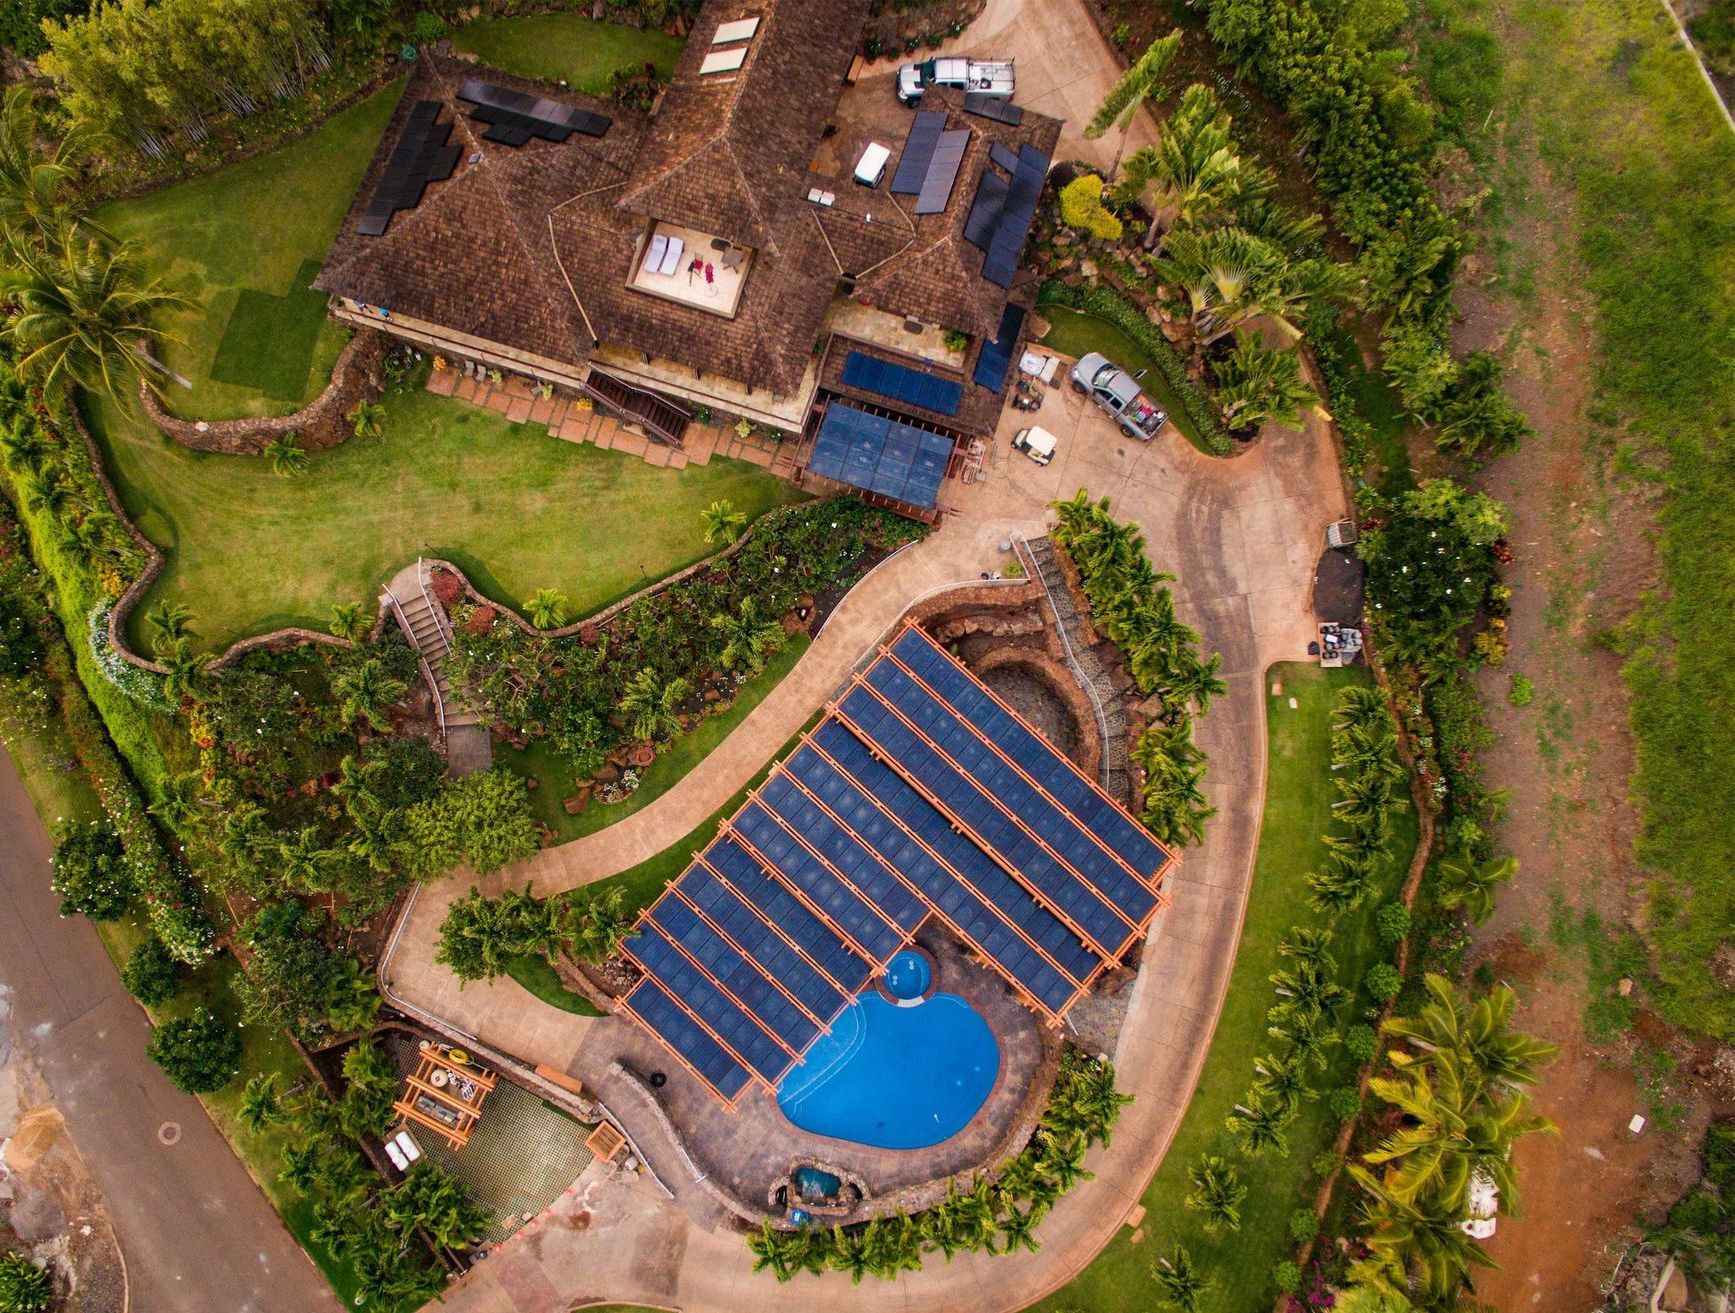 An aerial view of a Ryan Levis Architect home in Maui with a pool and solar panels on the roof.